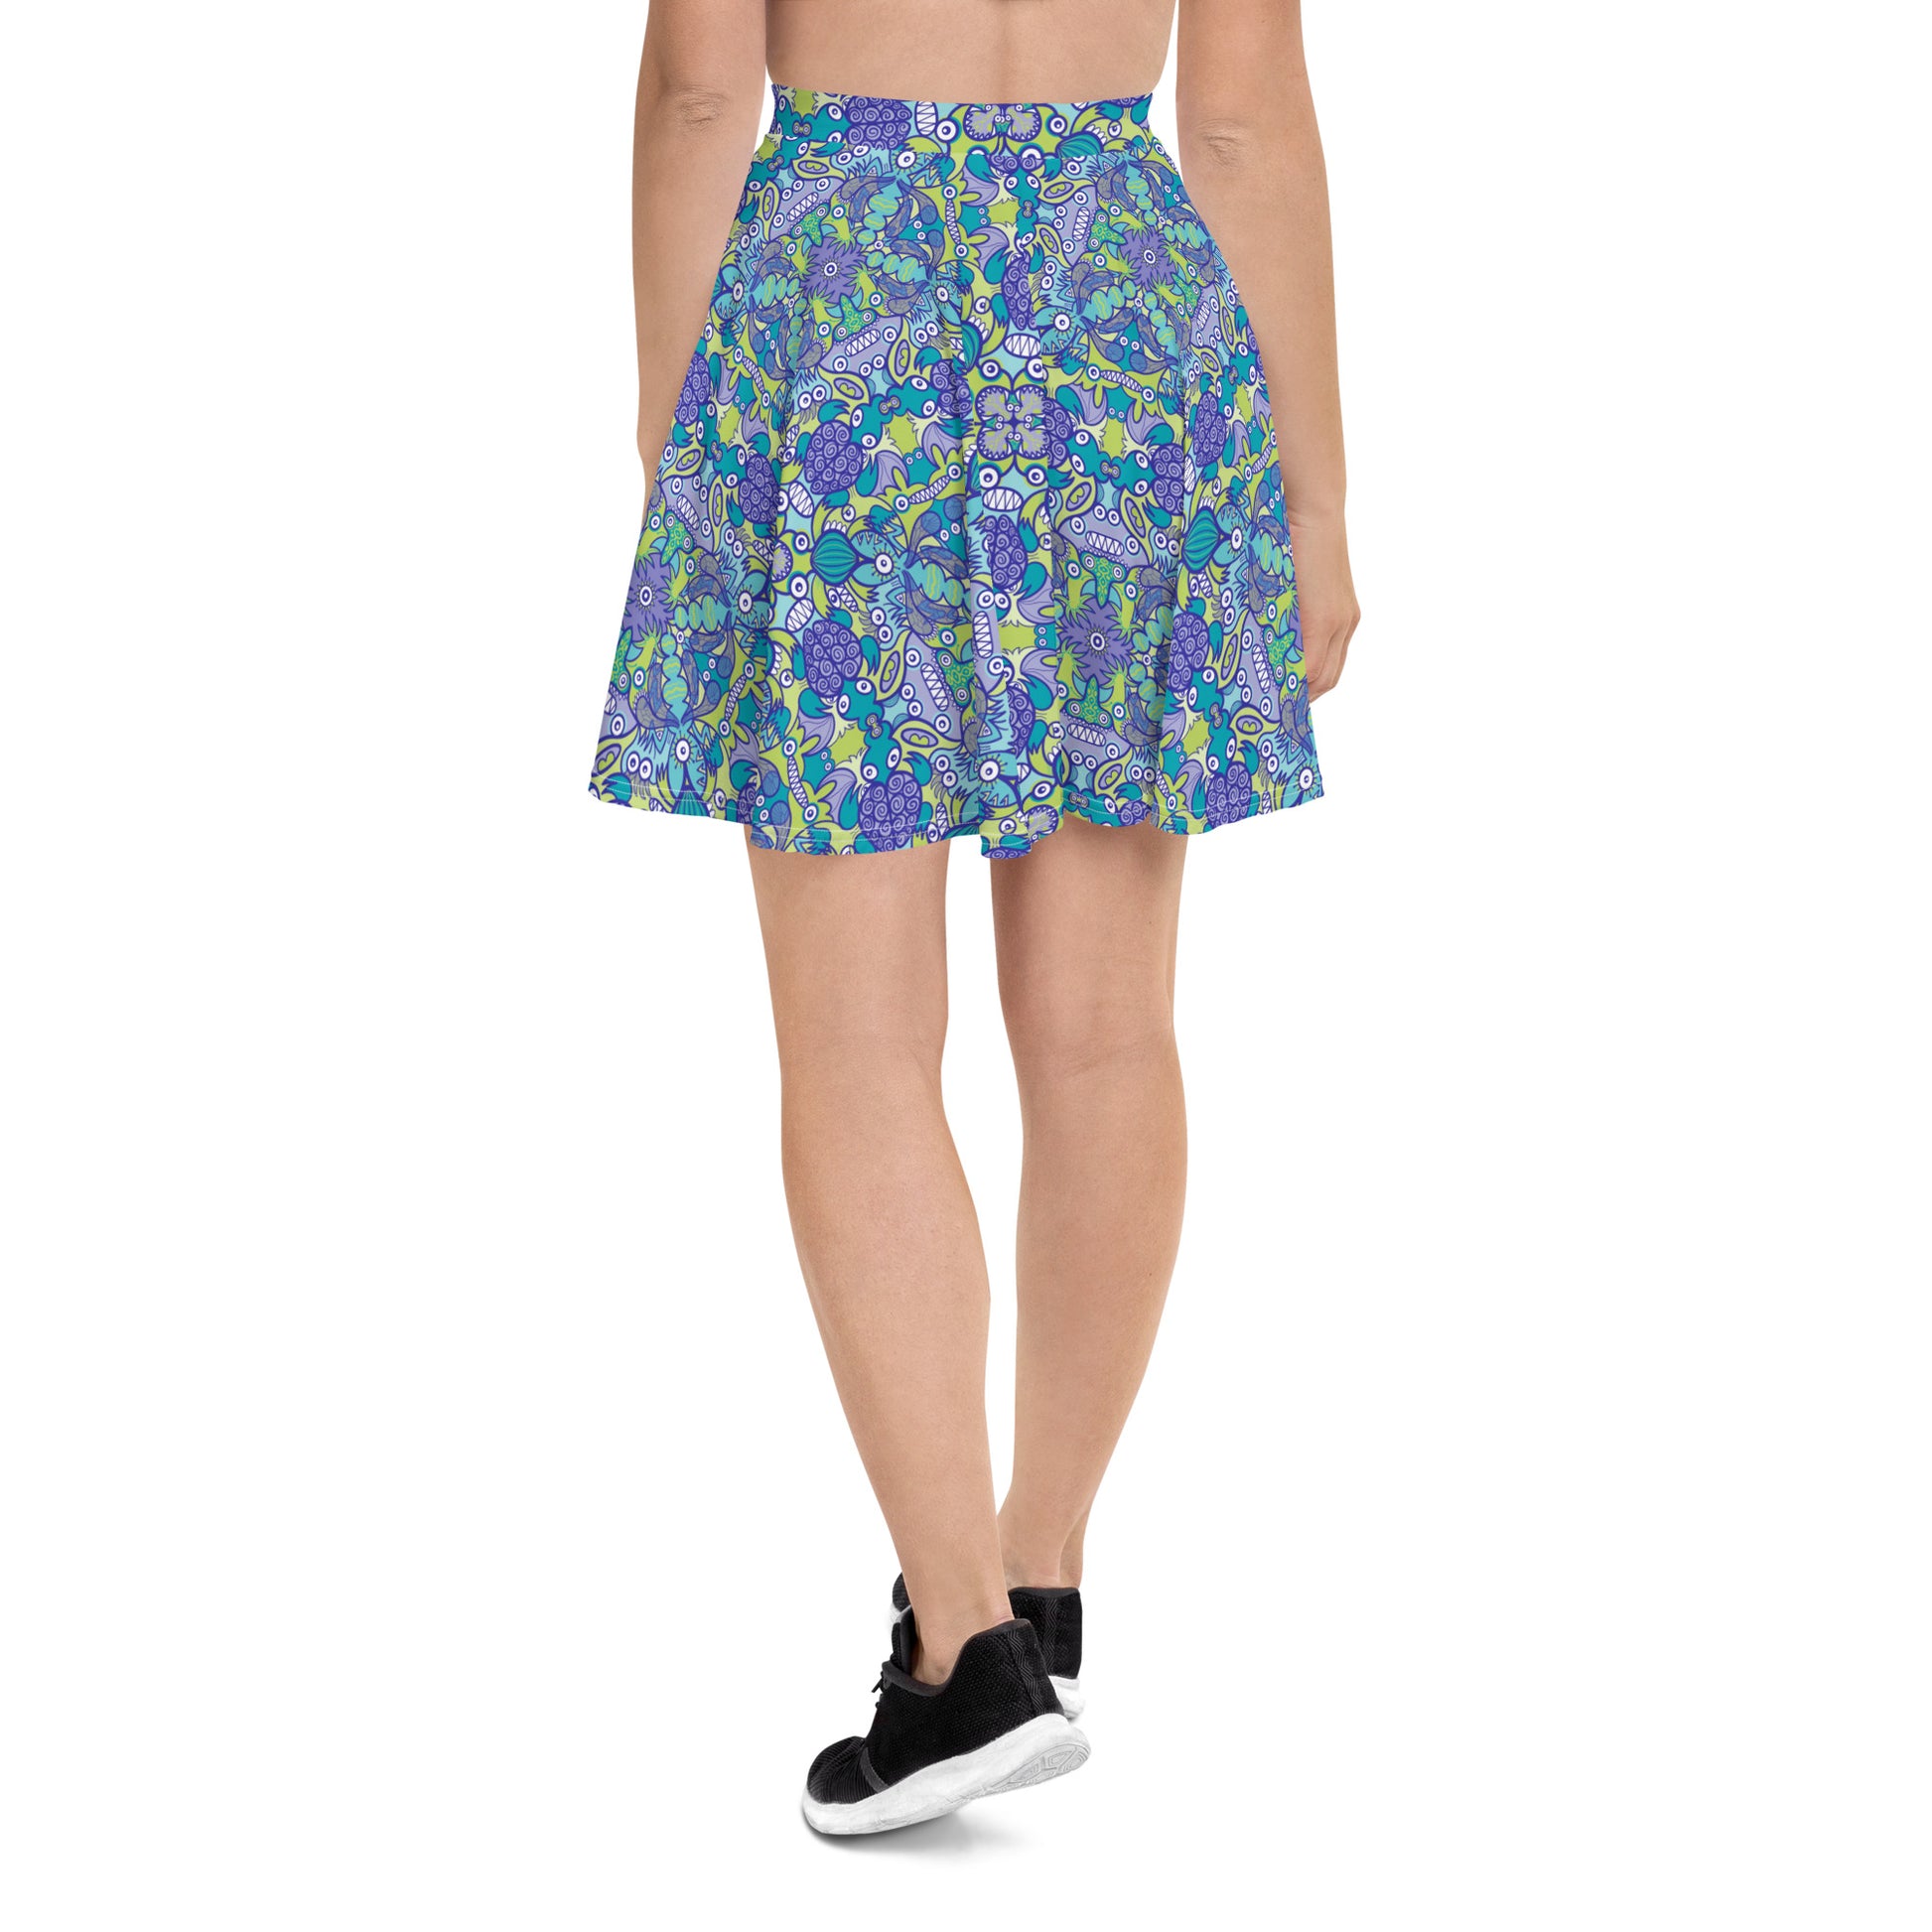 Once upon a time in an ocean full of life - Skater Skirt. Back view